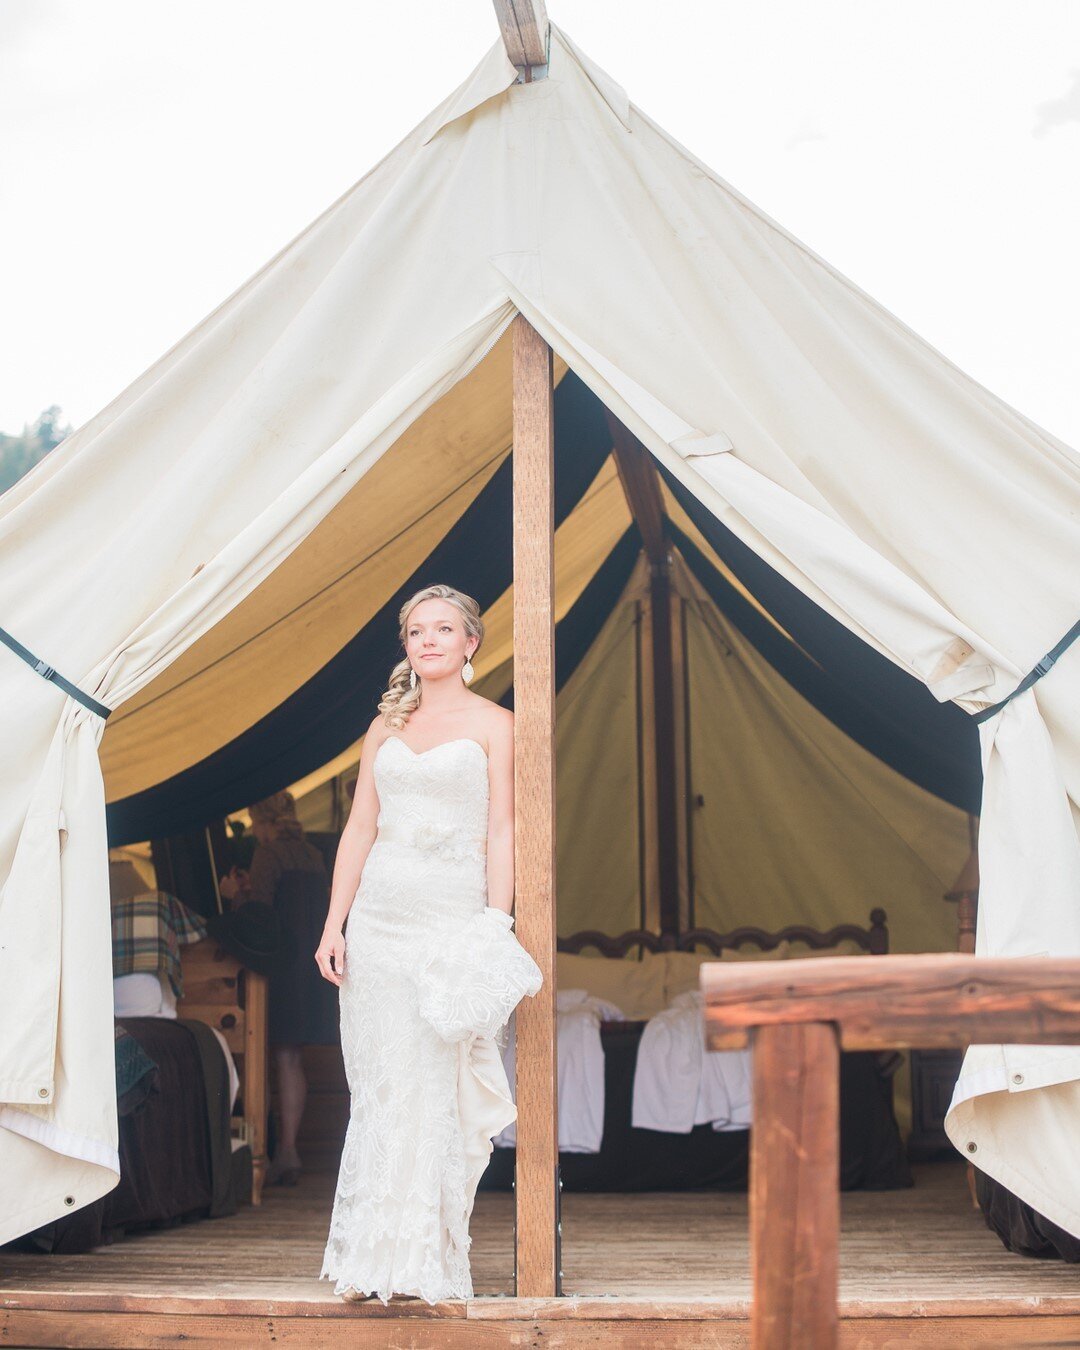 Do you want to go camping for your wedding?⠀⠀⠀⠀⠀⠀⠀⠀⠀
⠀⠀⠀⠀⠀⠀⠀⠀⠀
I've got a better idea!!!!⠀⠀⠀⠀⠀⠀⠀⠀⠀
⠀⠀⠀⠀⠀⠀⠀⠀⠀
GO GLAMPING!!⠀⠀⠀⠀⠀⠀⠀⠀⠀
⠀⠀⠀⠀⠀⠀⠀⠀⠀
Glamping is perfect for adventurous couples who want to elope! There are plenty of varieties of glamping ven